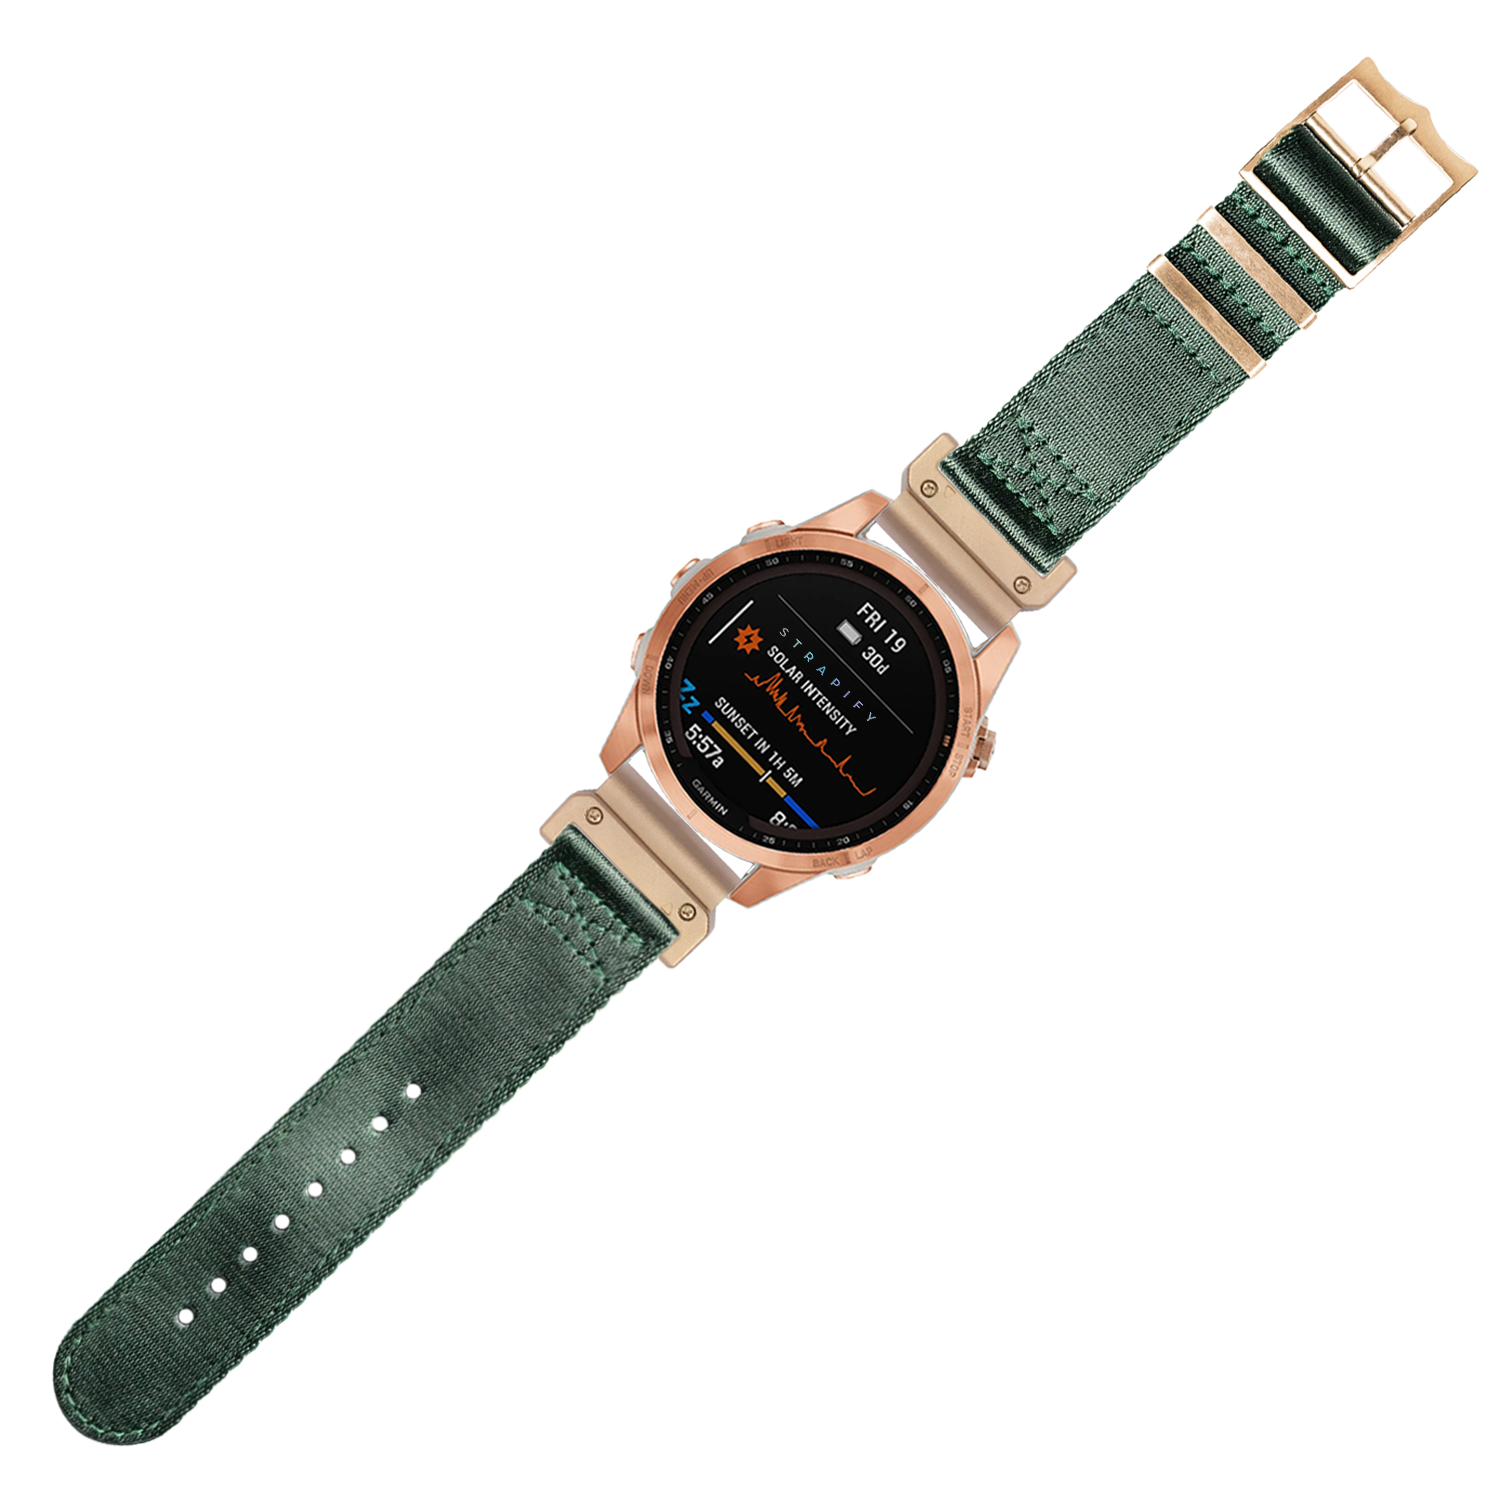 [QuickFit] Ultra Militex - Forest Green [Rose Gold Hardware] 26mm